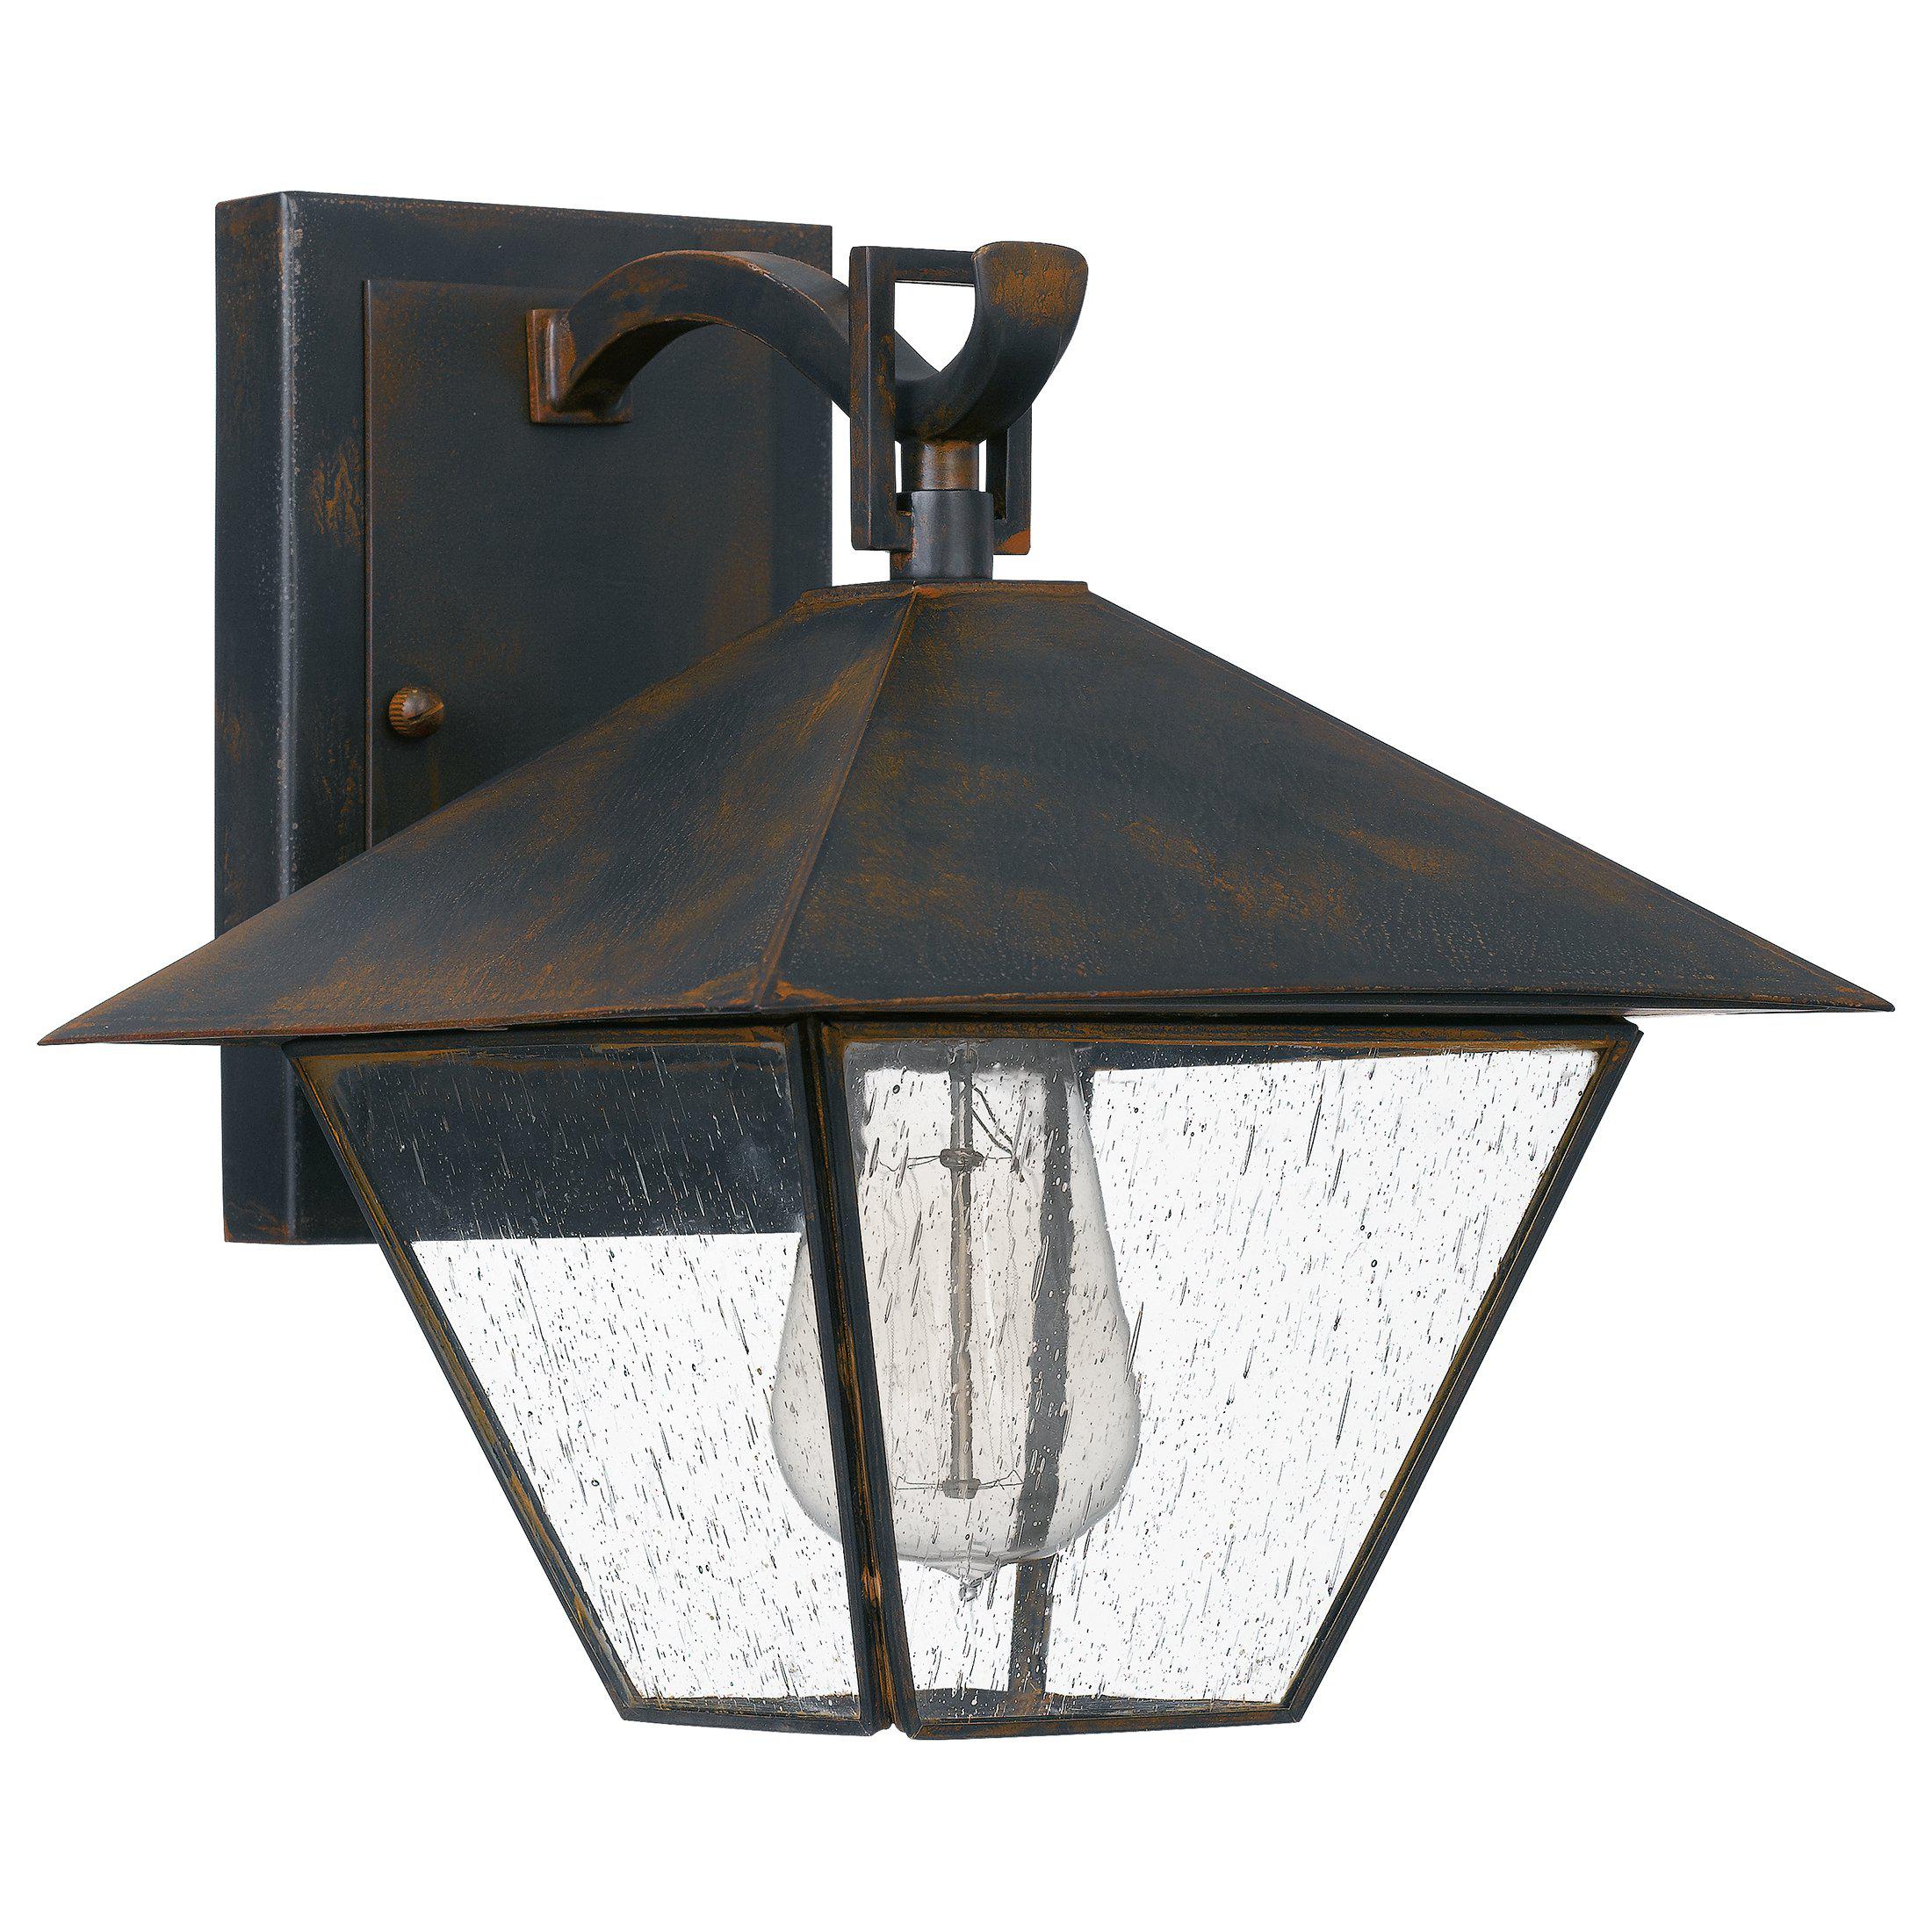 Quoizel  Corporal Outdoor Lantern, Small Outdoor l Wall Quoizel   